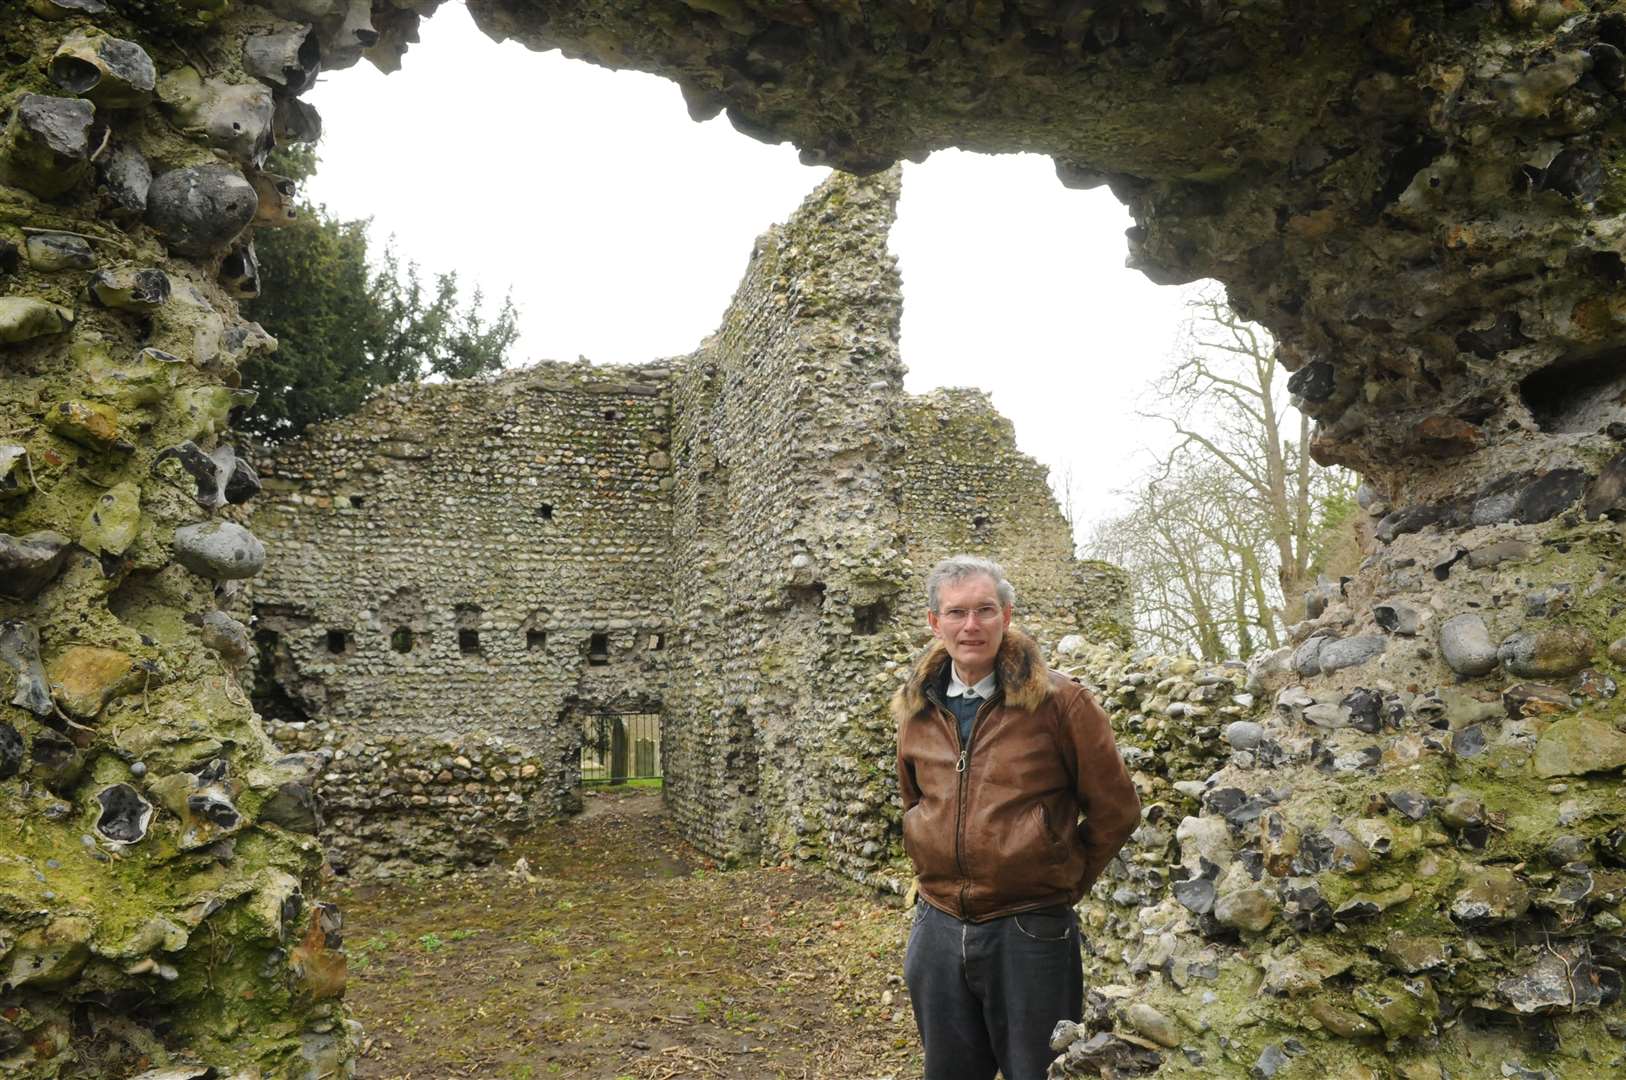 In 2012 Bryan Wilding said he believed Walmer Court could be described as a "proto-keep" type of castle